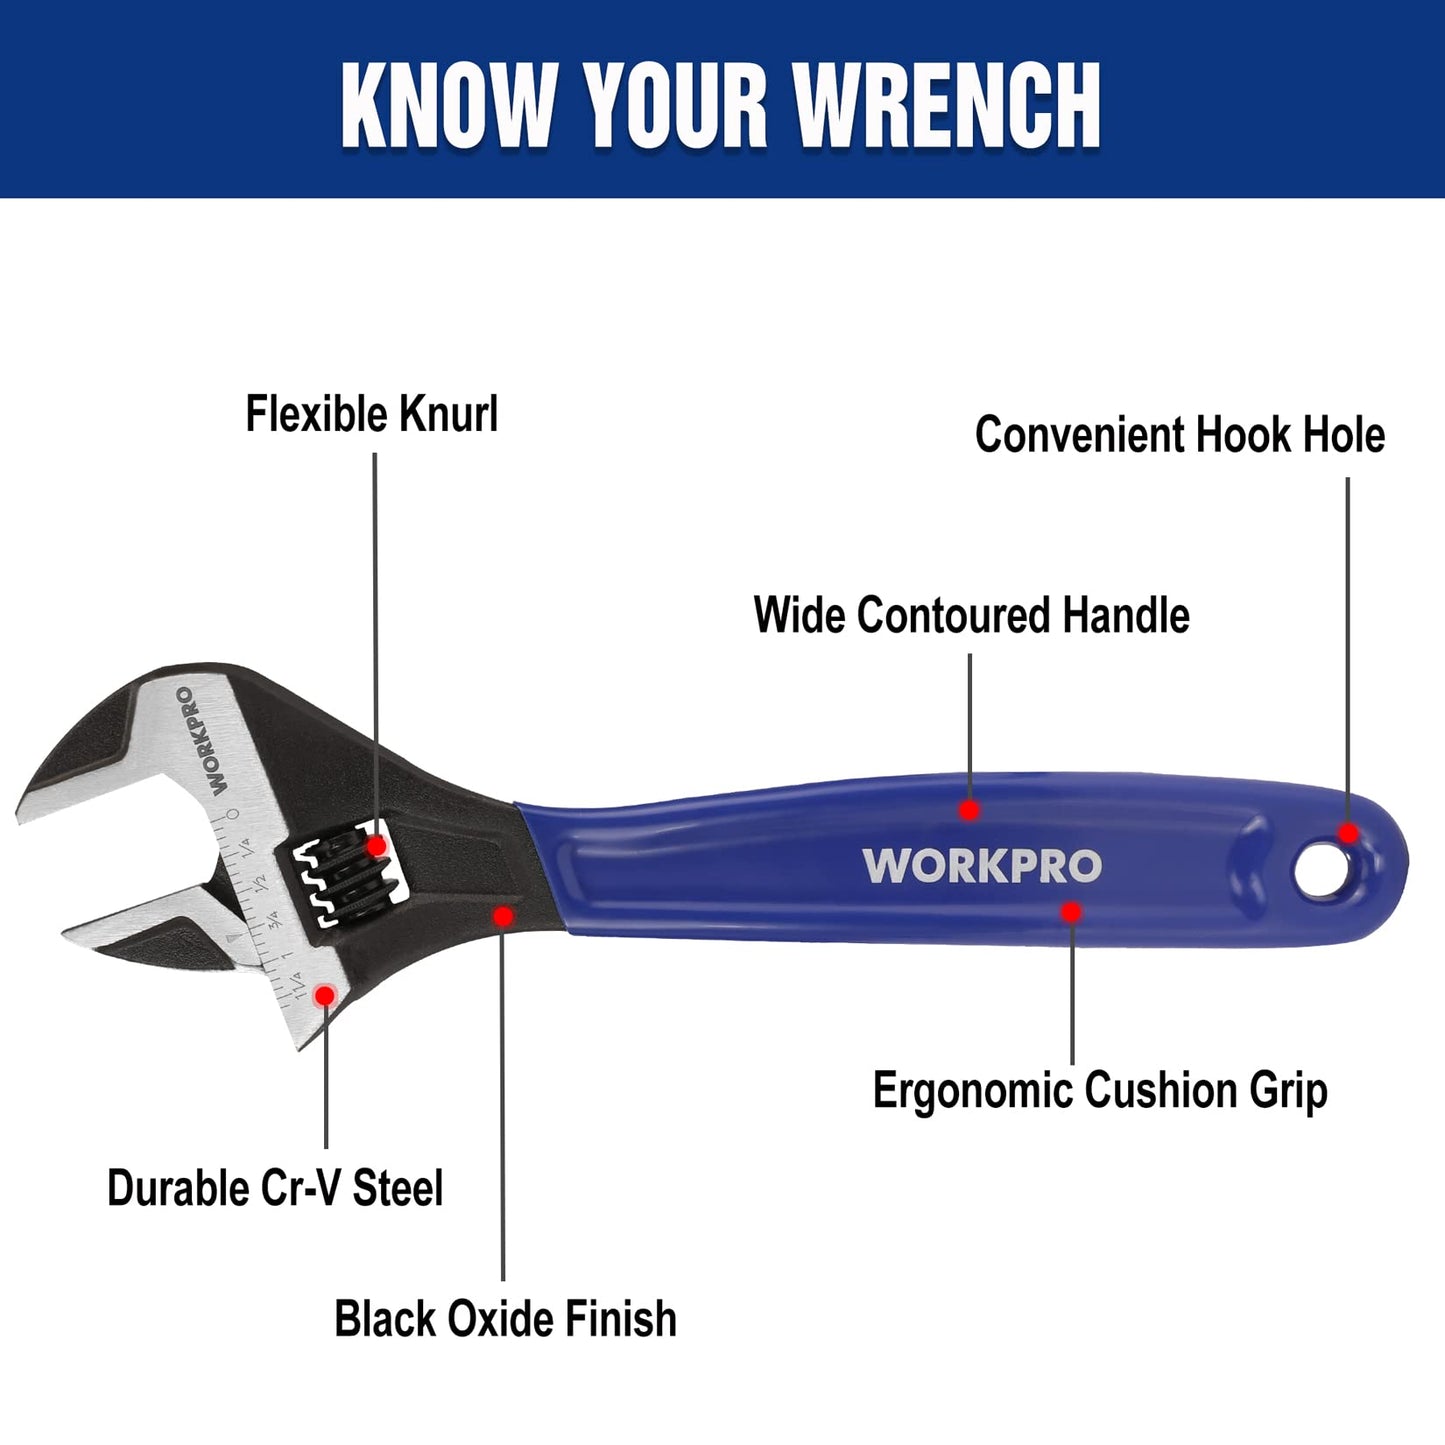 WORKPRO 2-piece Adjustable Wrench Set, 6-Inch & 10-Inch Wrenches, Wide Jaw Black Oxide Wrench, Metric & SAE Scales, Cr-V Steel, for Home, Garage,